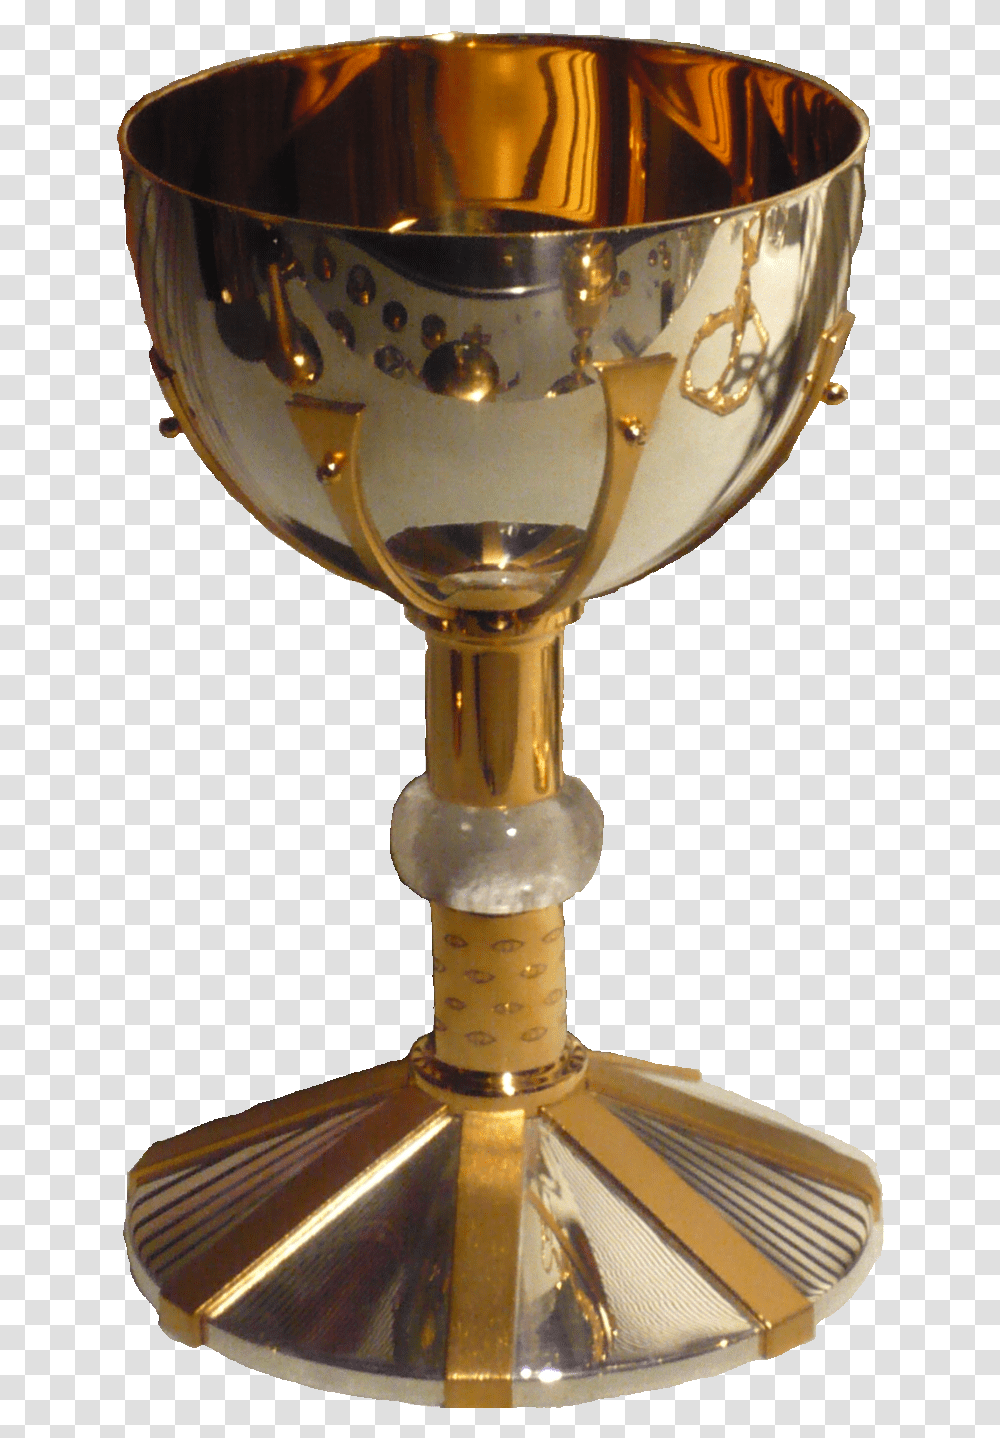 Holy Grail Chalice, Trophy, Lighting, Lamp, Glass Transparent Png